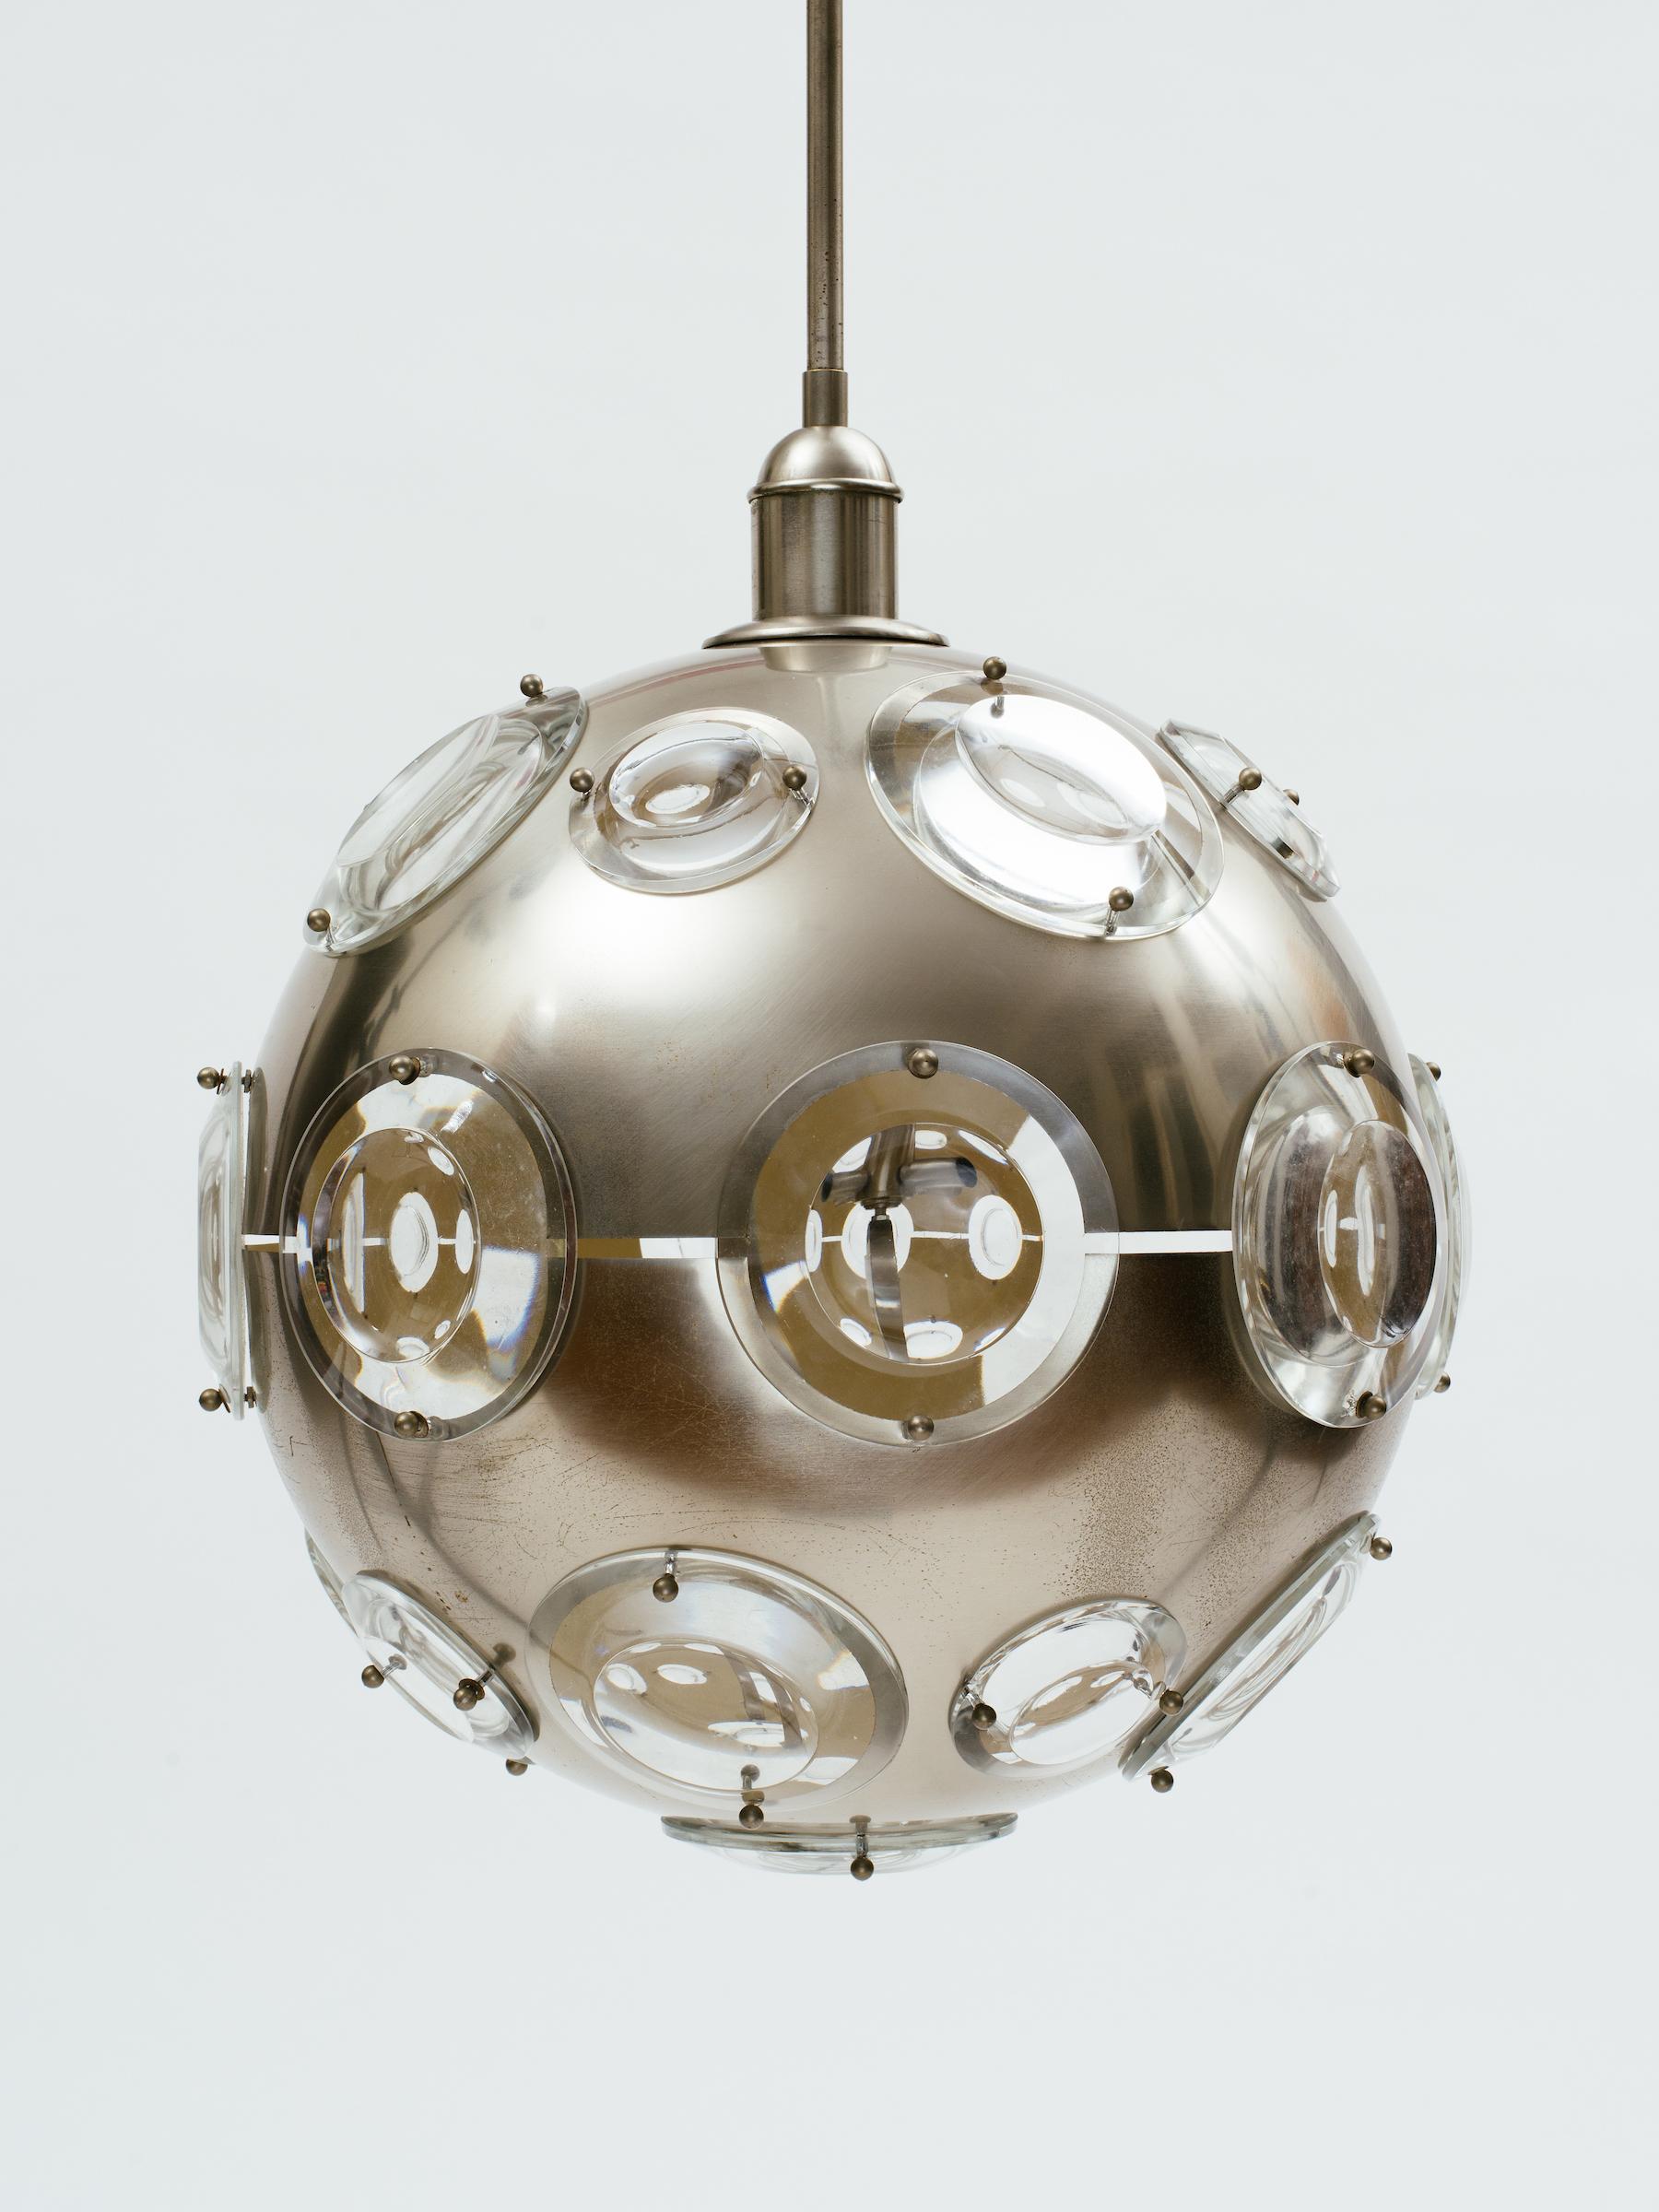 Large Oscar Torlasco brushed steel orb chandelier with beveled glass oculus windows that are illuminated from within. White enamel interior. Original steel rod and ceiling cap.
Italy, circa 1968.
 